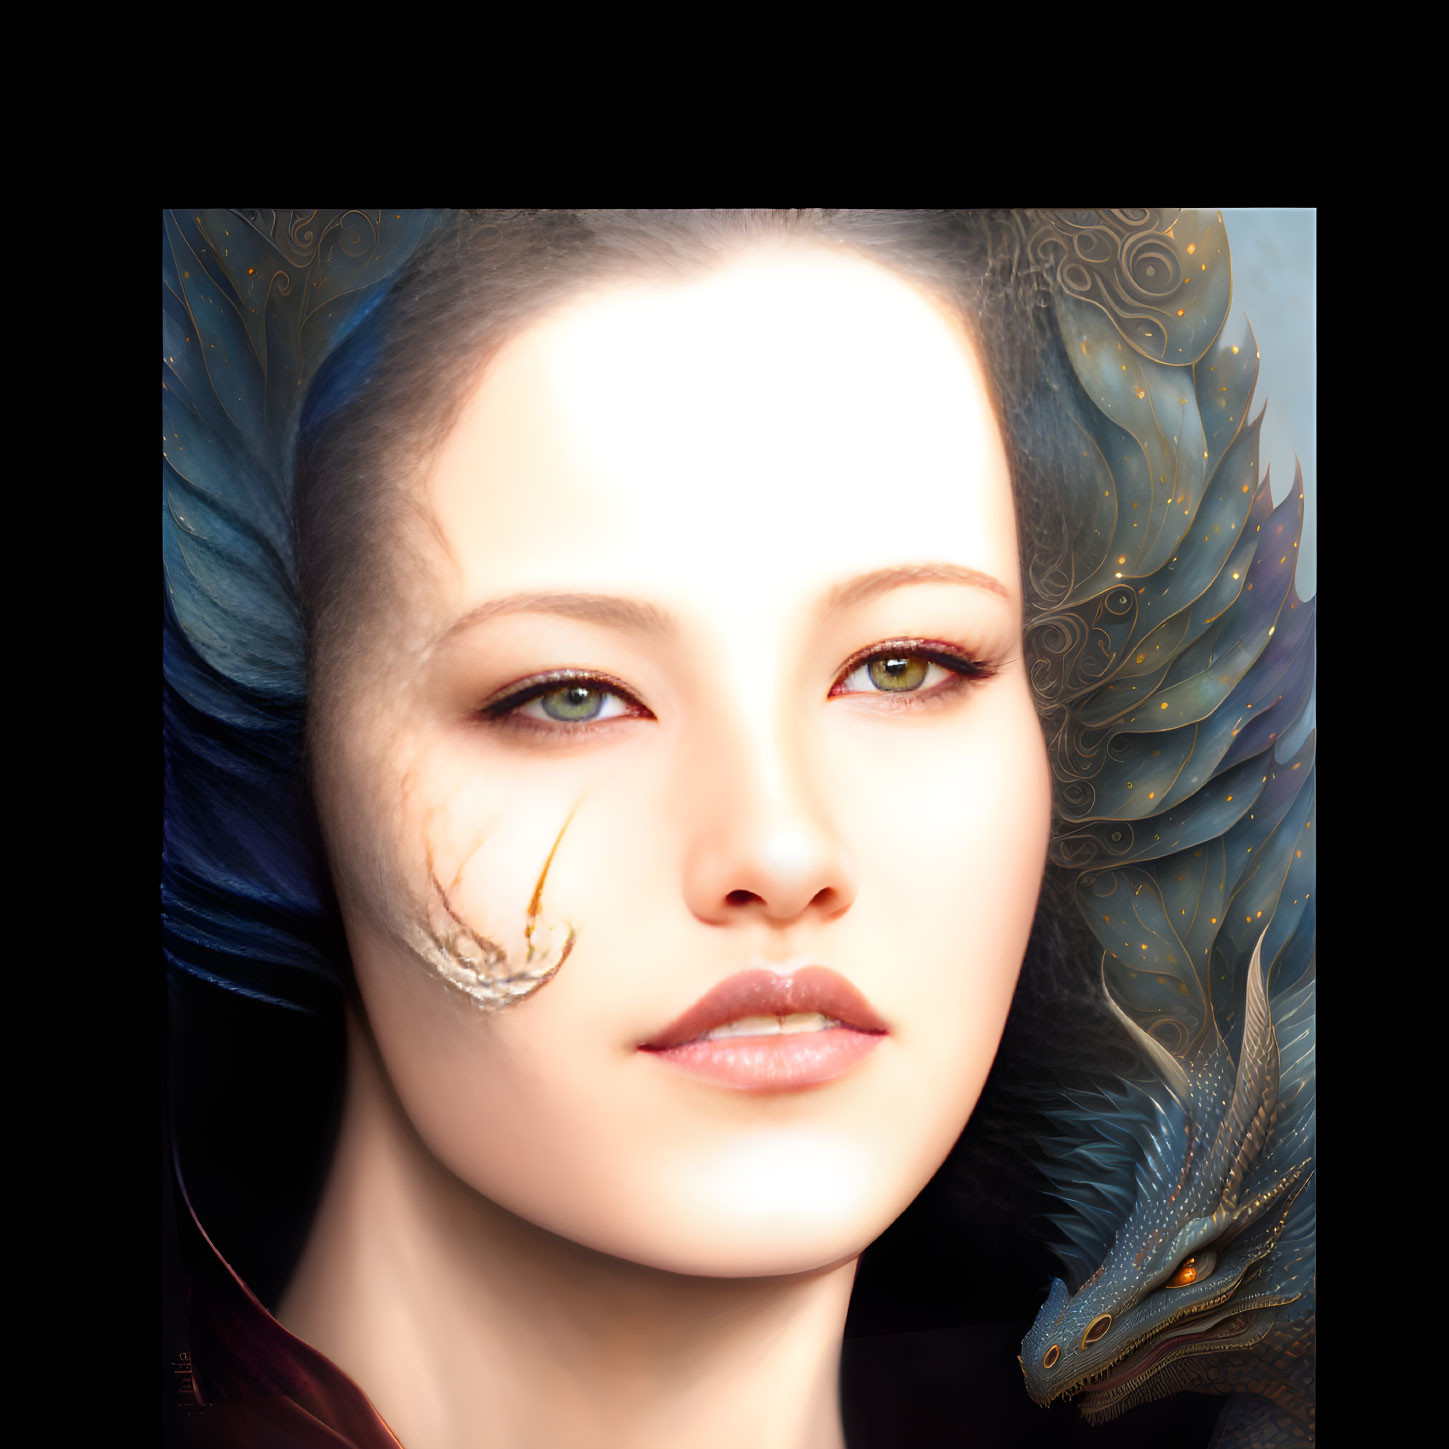 Woman with heterochromia and blue feathers beside a dragon-like creature